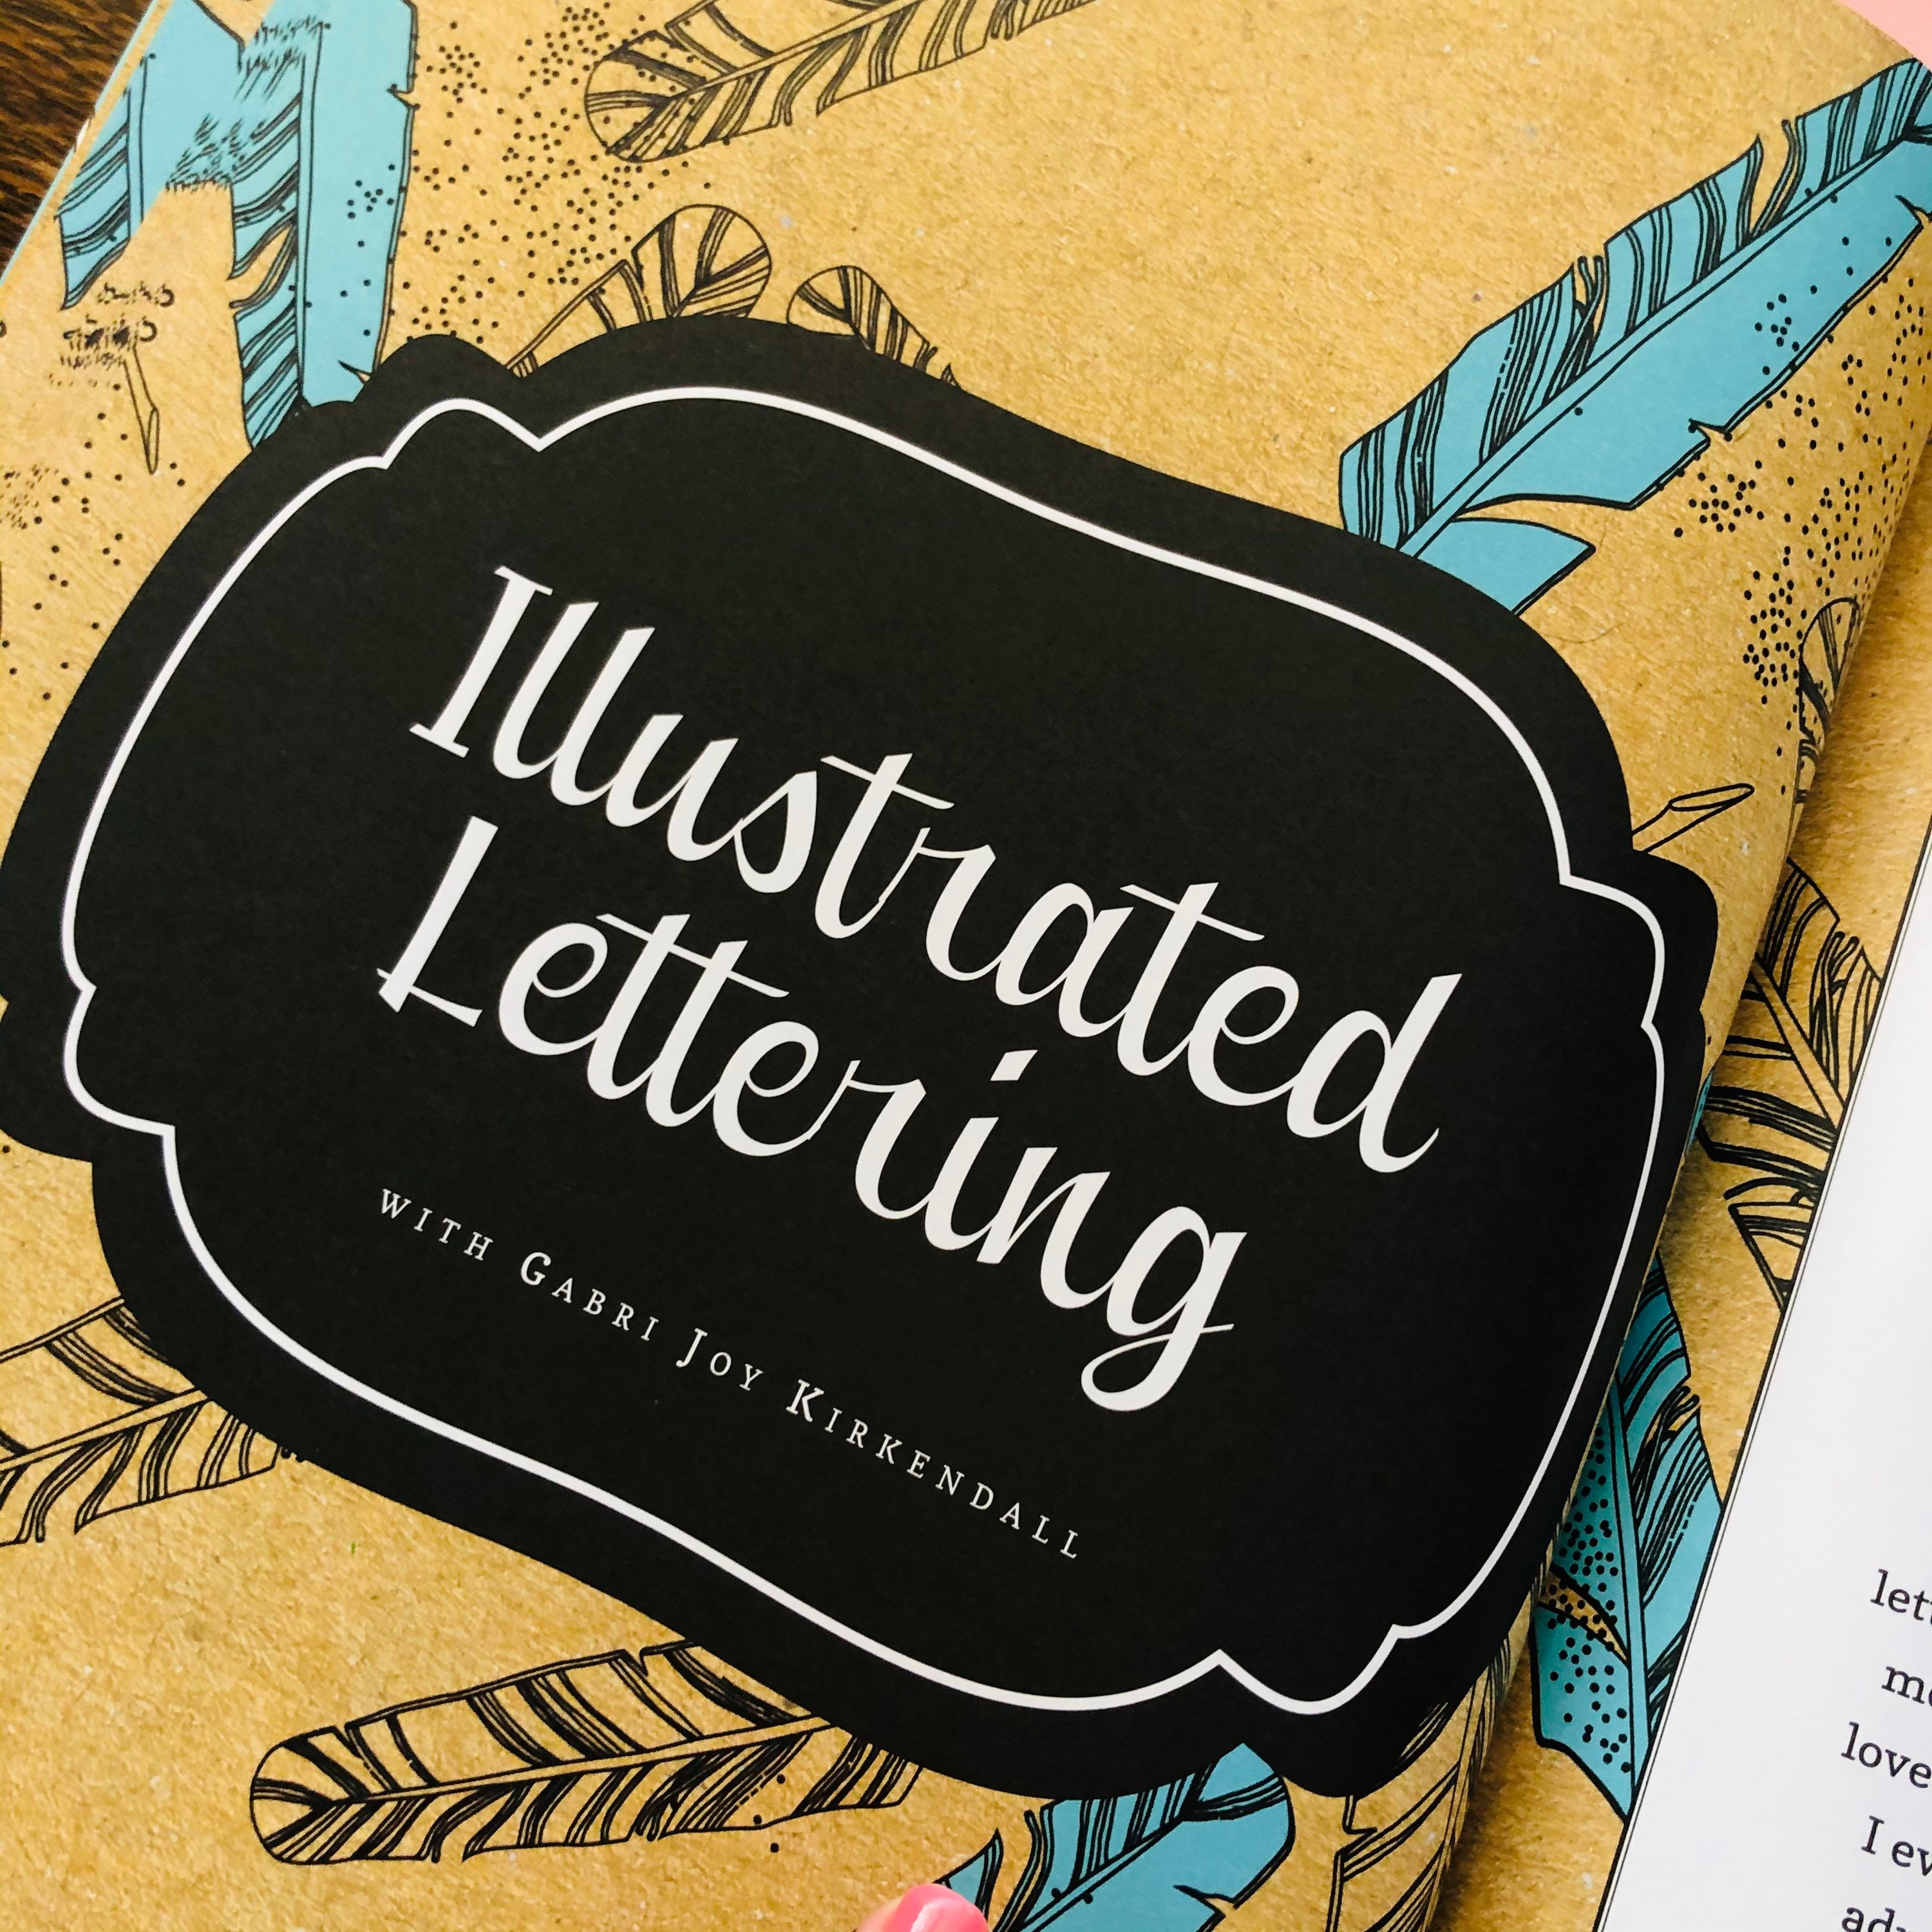 Hand Lettering Book, Creative Lettering and Beyond, Modern